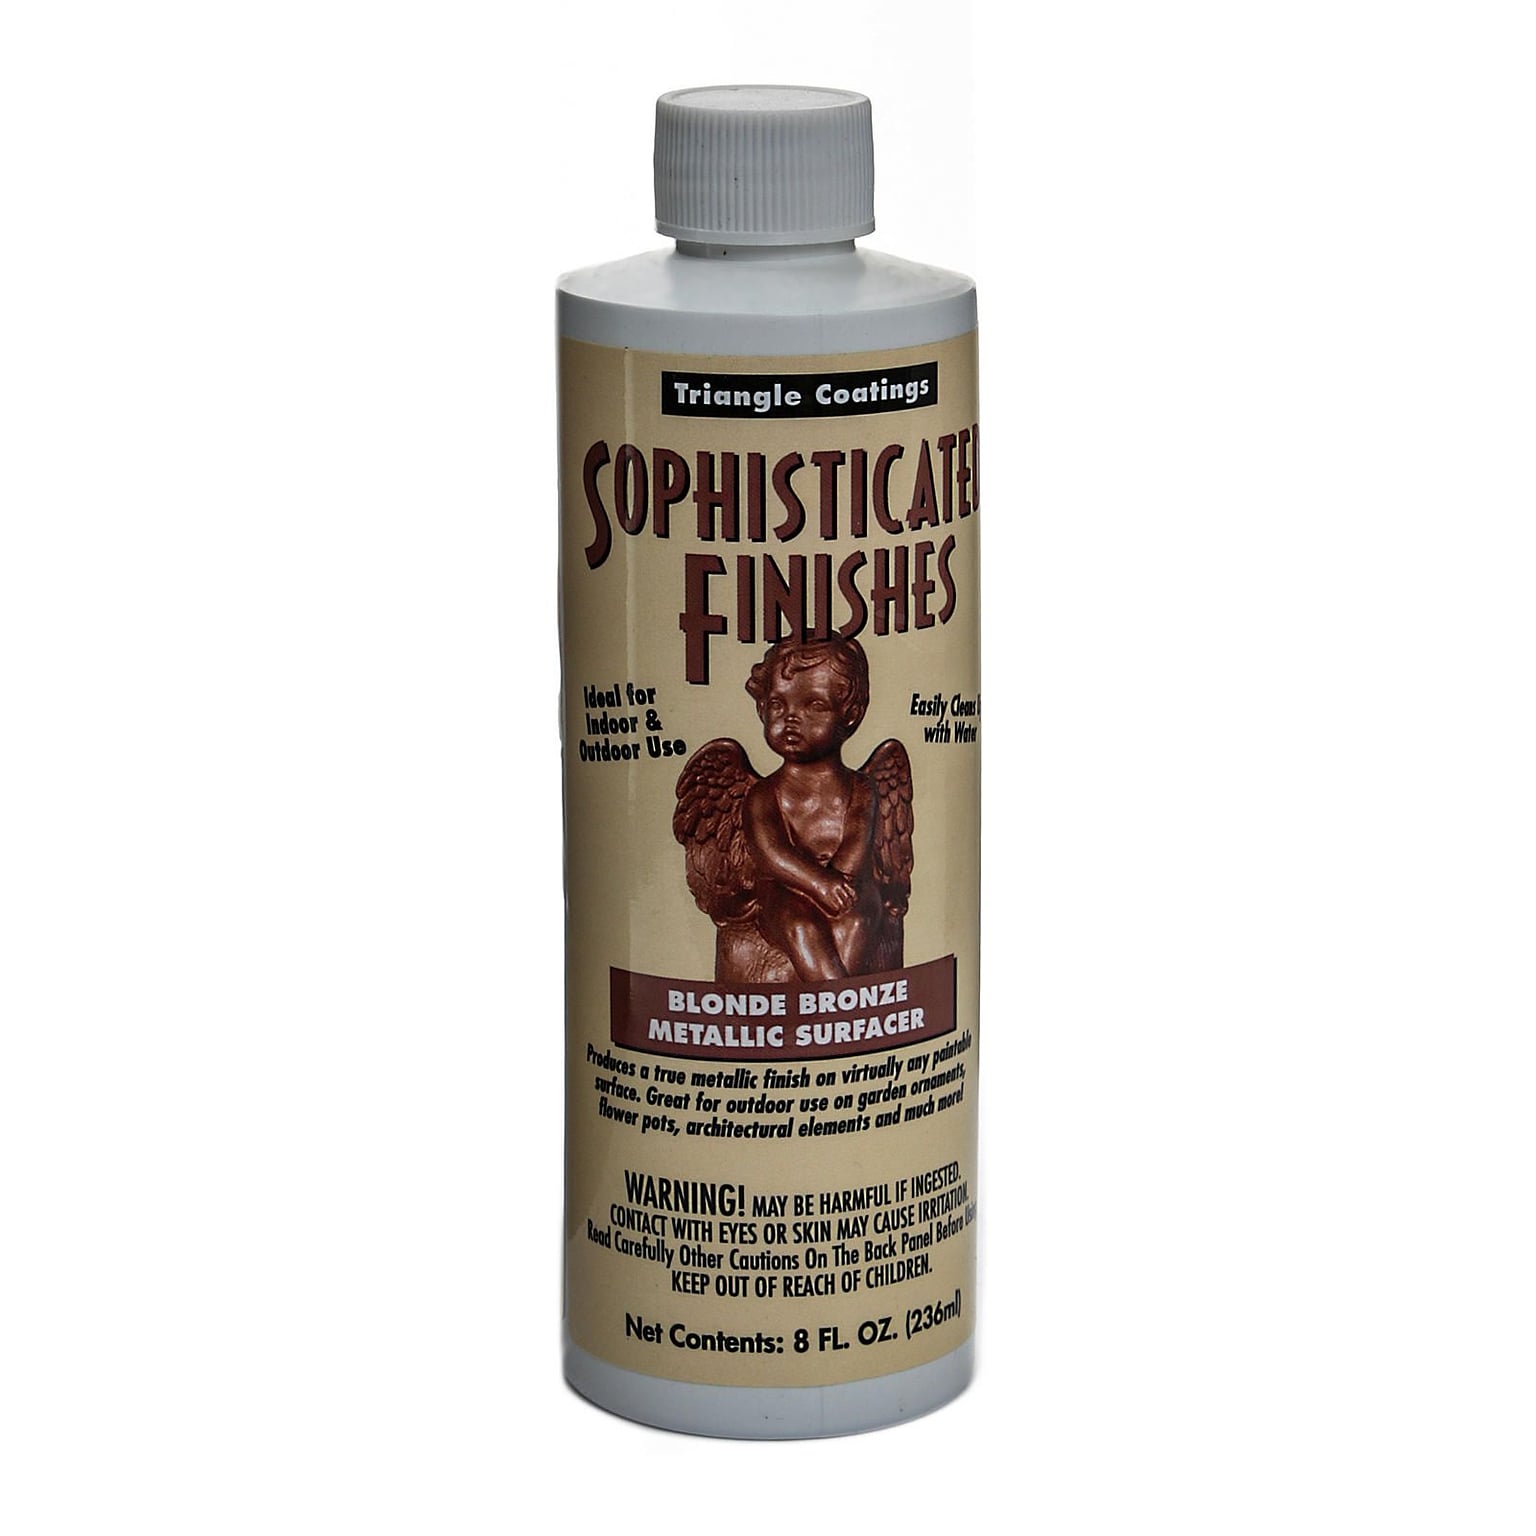 Triangle Coatings Sophisticated Finishes Metallic Surfacers Blonde Bronze 8 Oz. (BDZ6)